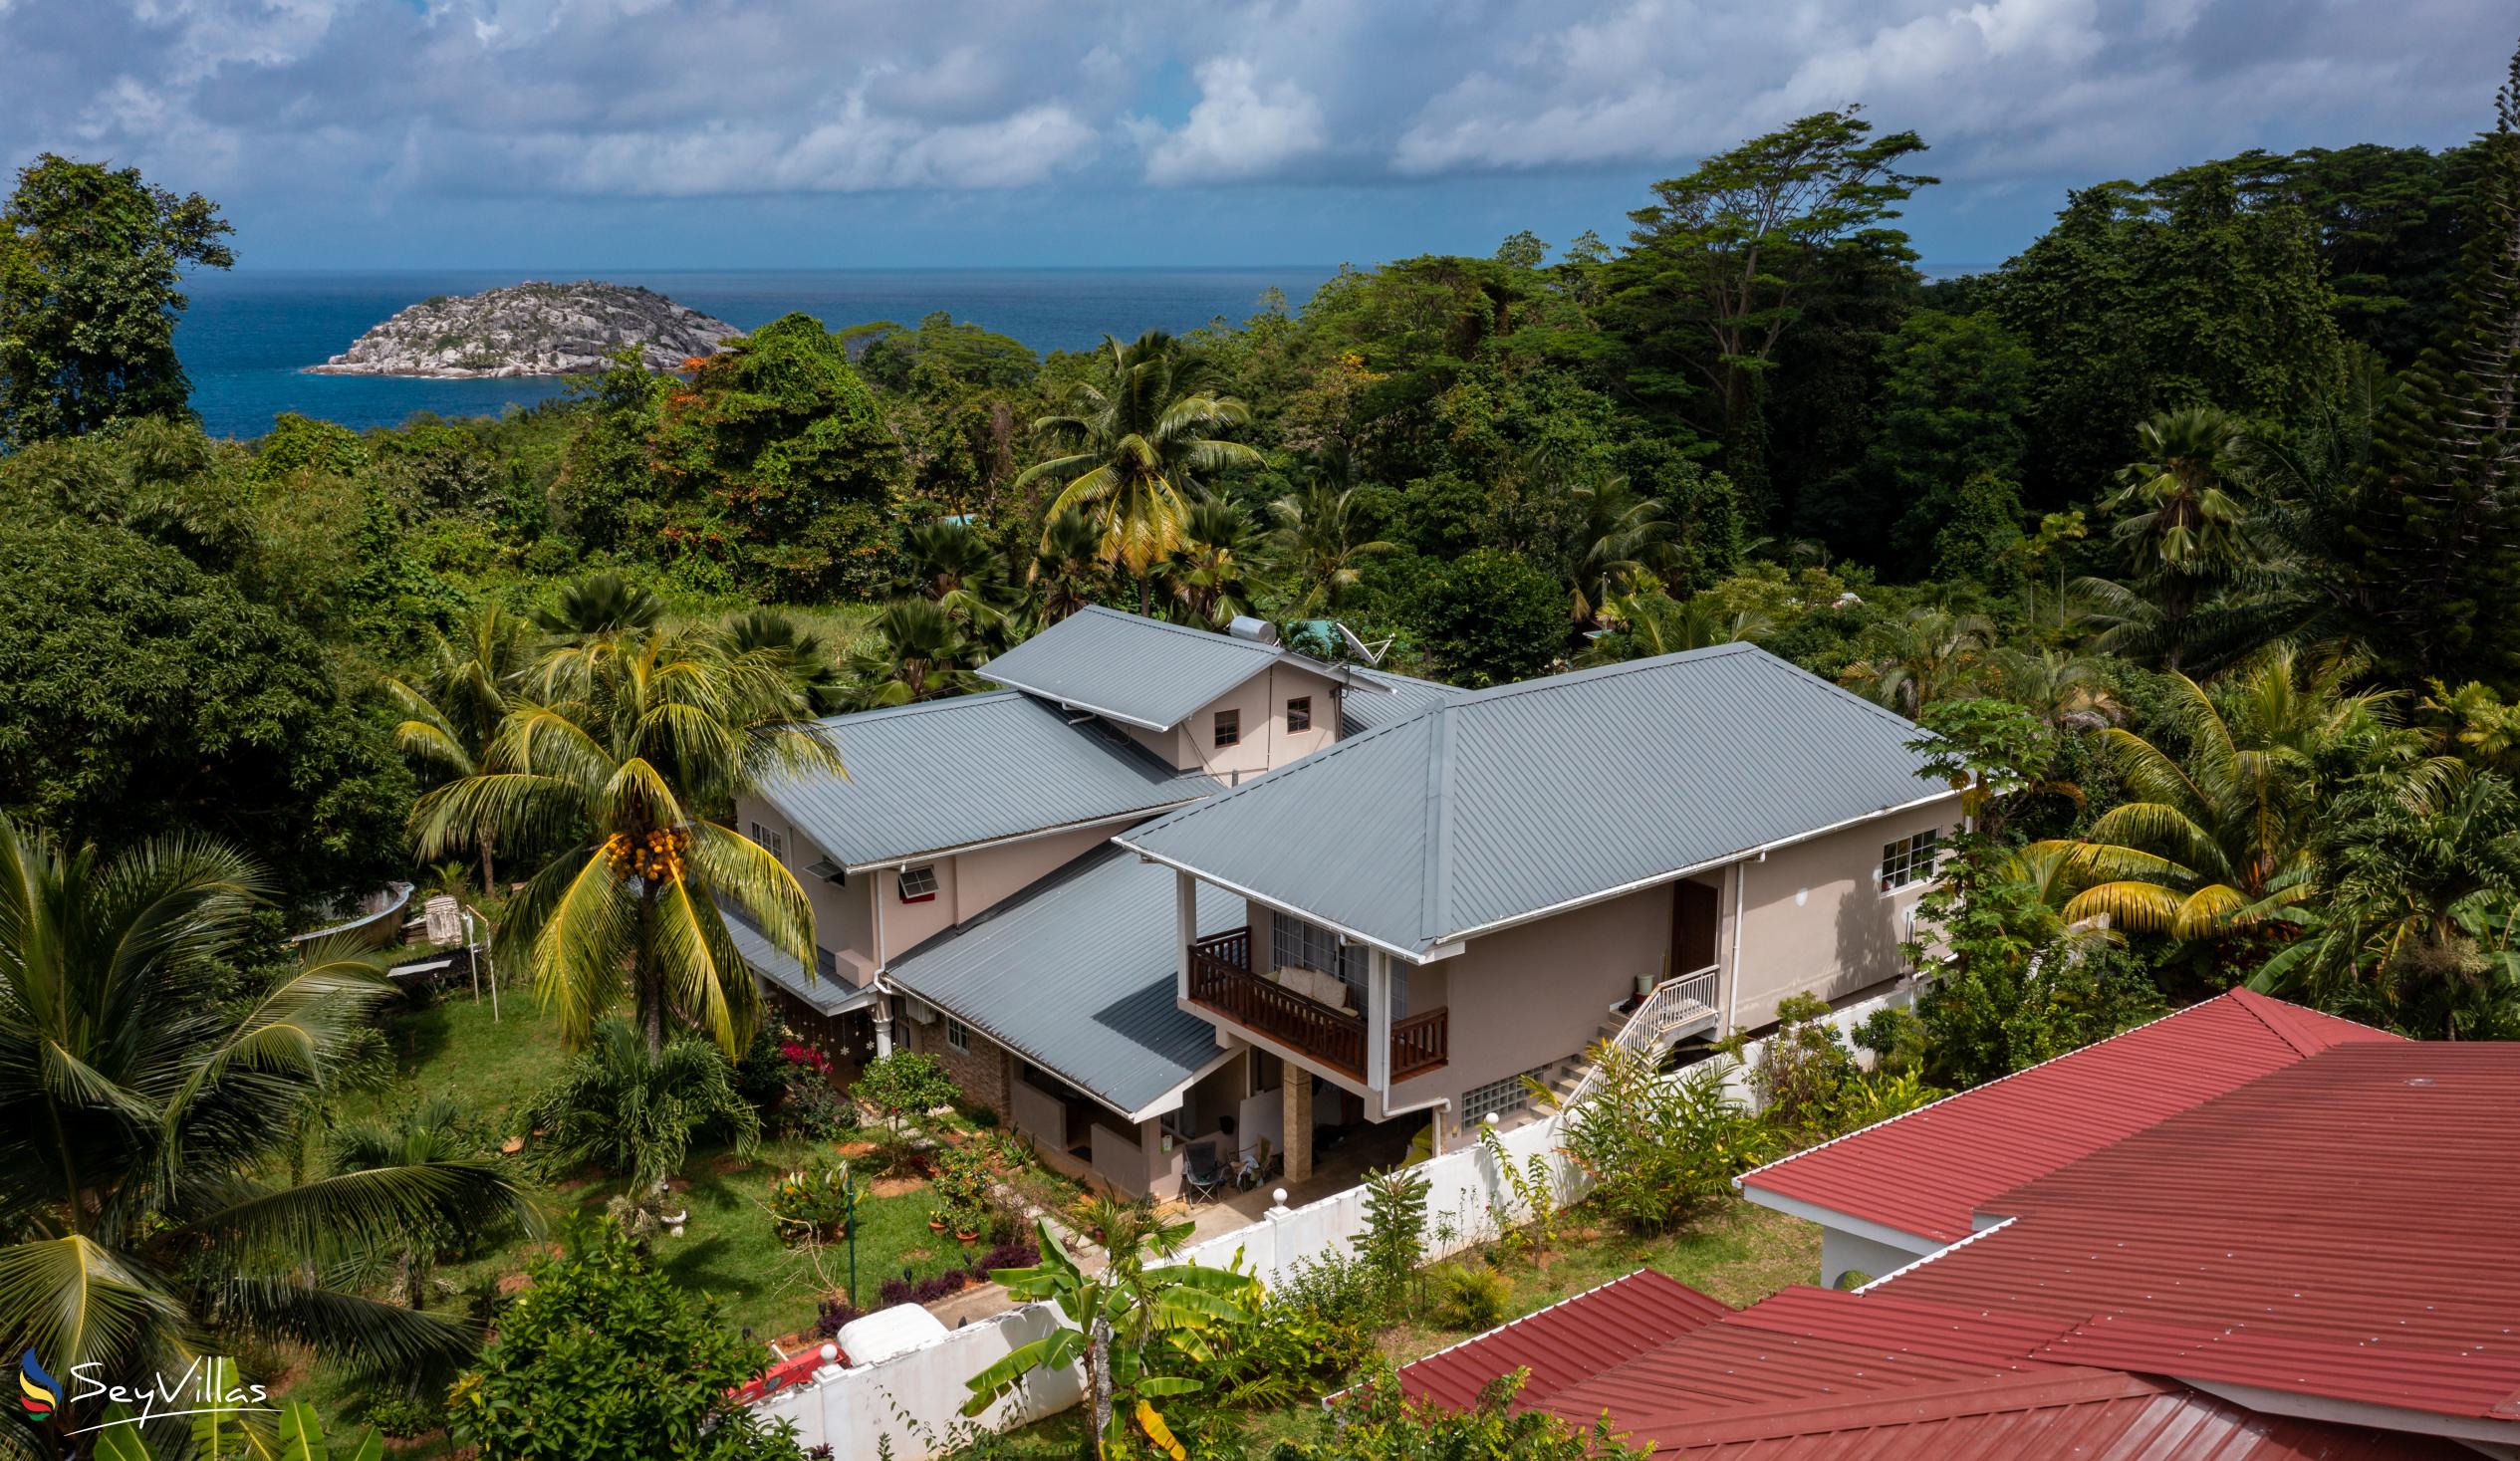 Foto 37: Ogumka Self Catering Beoliere - Posizione - Mahé (Seychelles)